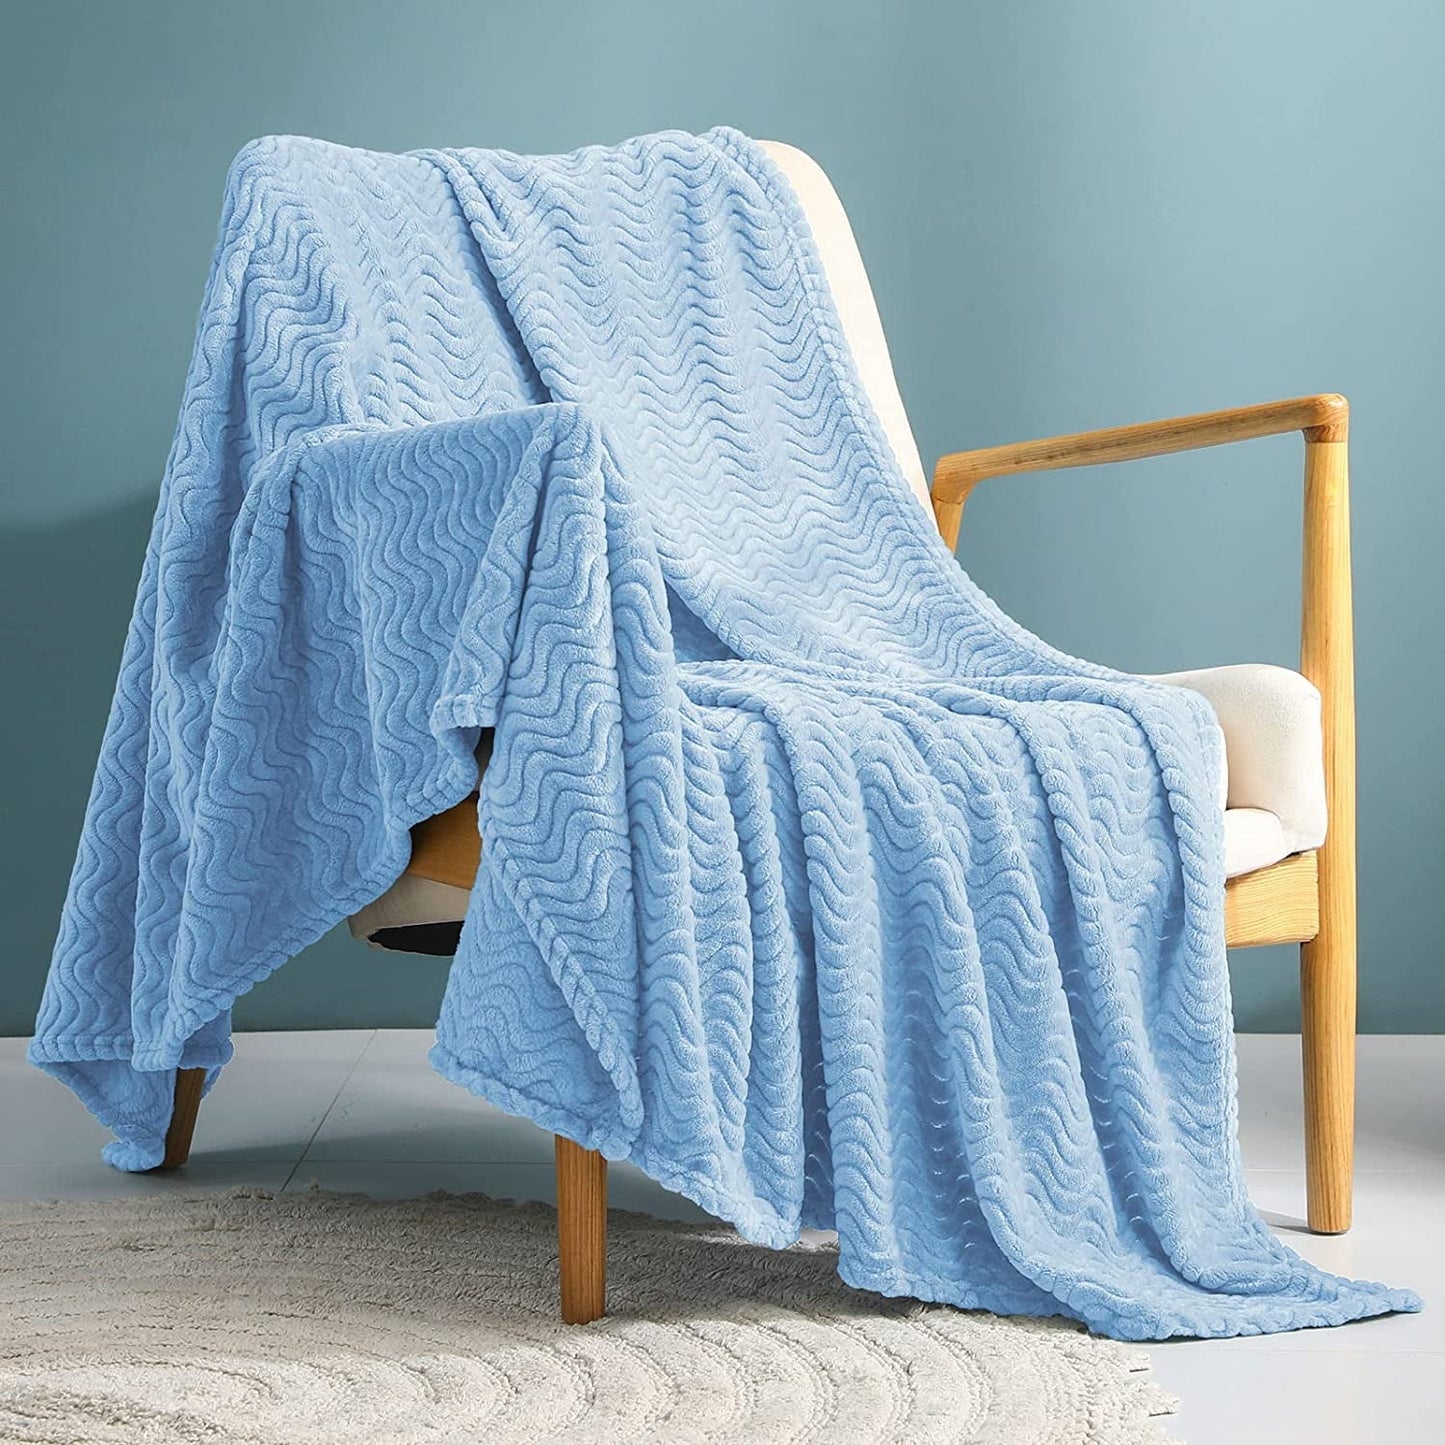 Exclusivo Mezcla Large Flannel Fleece Throw Blanket, 50x70 Inches Soft Jacquard Weave Wave Pattern Blanket for Couch, Cozy, Warm, Lightweight and Decorative Baby Blue Blanket